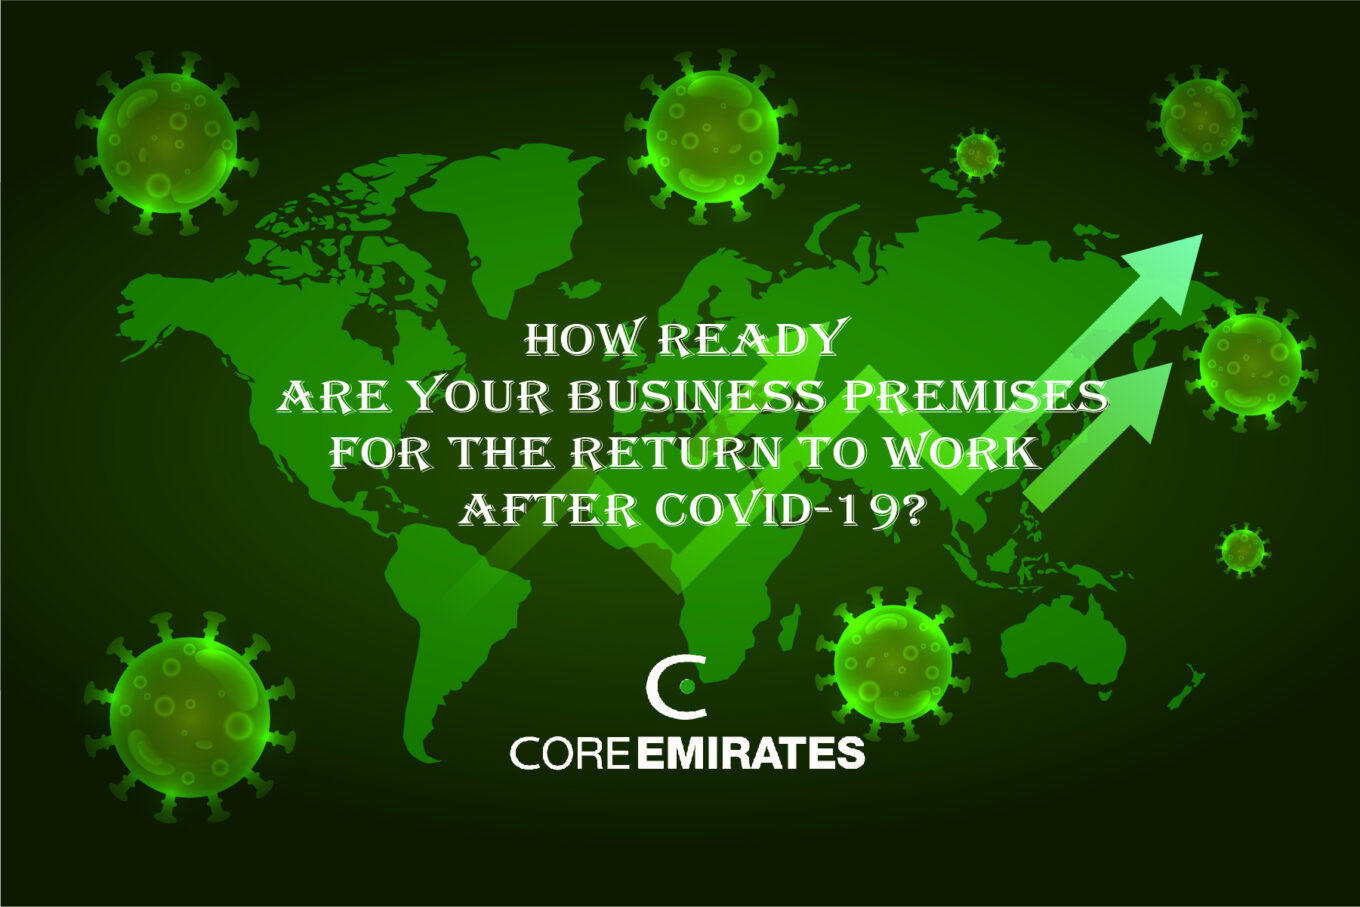 How ready are your business premises for the return to work after Covid-19